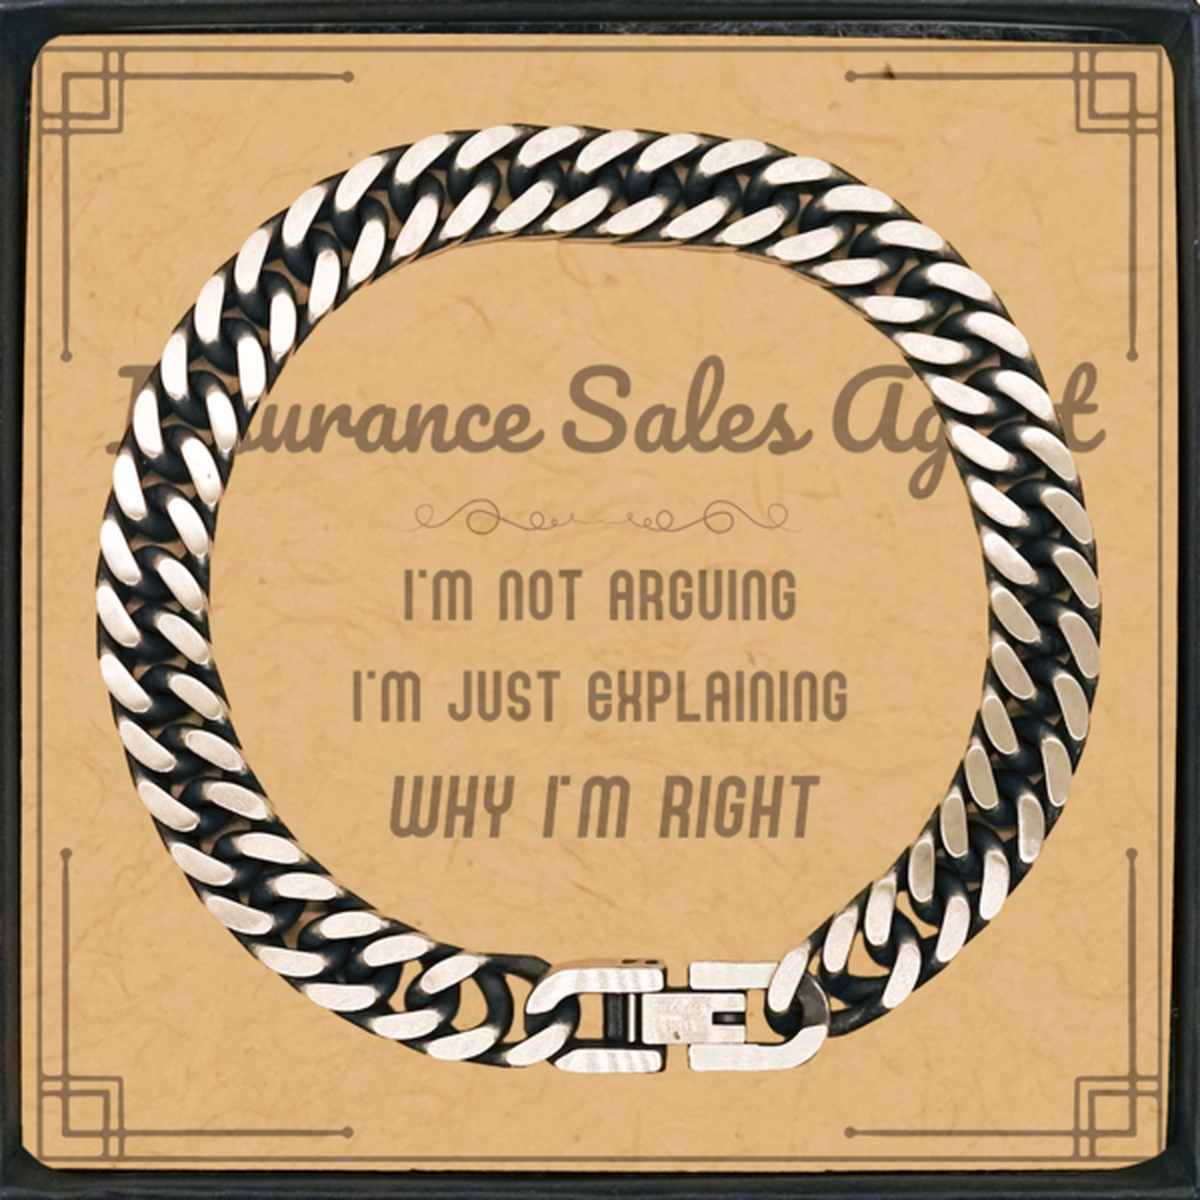 Insurance Sales Agent I'm not Arguing. I'm Just Explaining Why I'm RIGHT Cuban Link Chain Bracelet, Funny Saying Quote Insurance Sales Agent Gifts For Insurance Sales Agent Message Card Graduation Birthday Christmas Gifts for Men Women Coworker